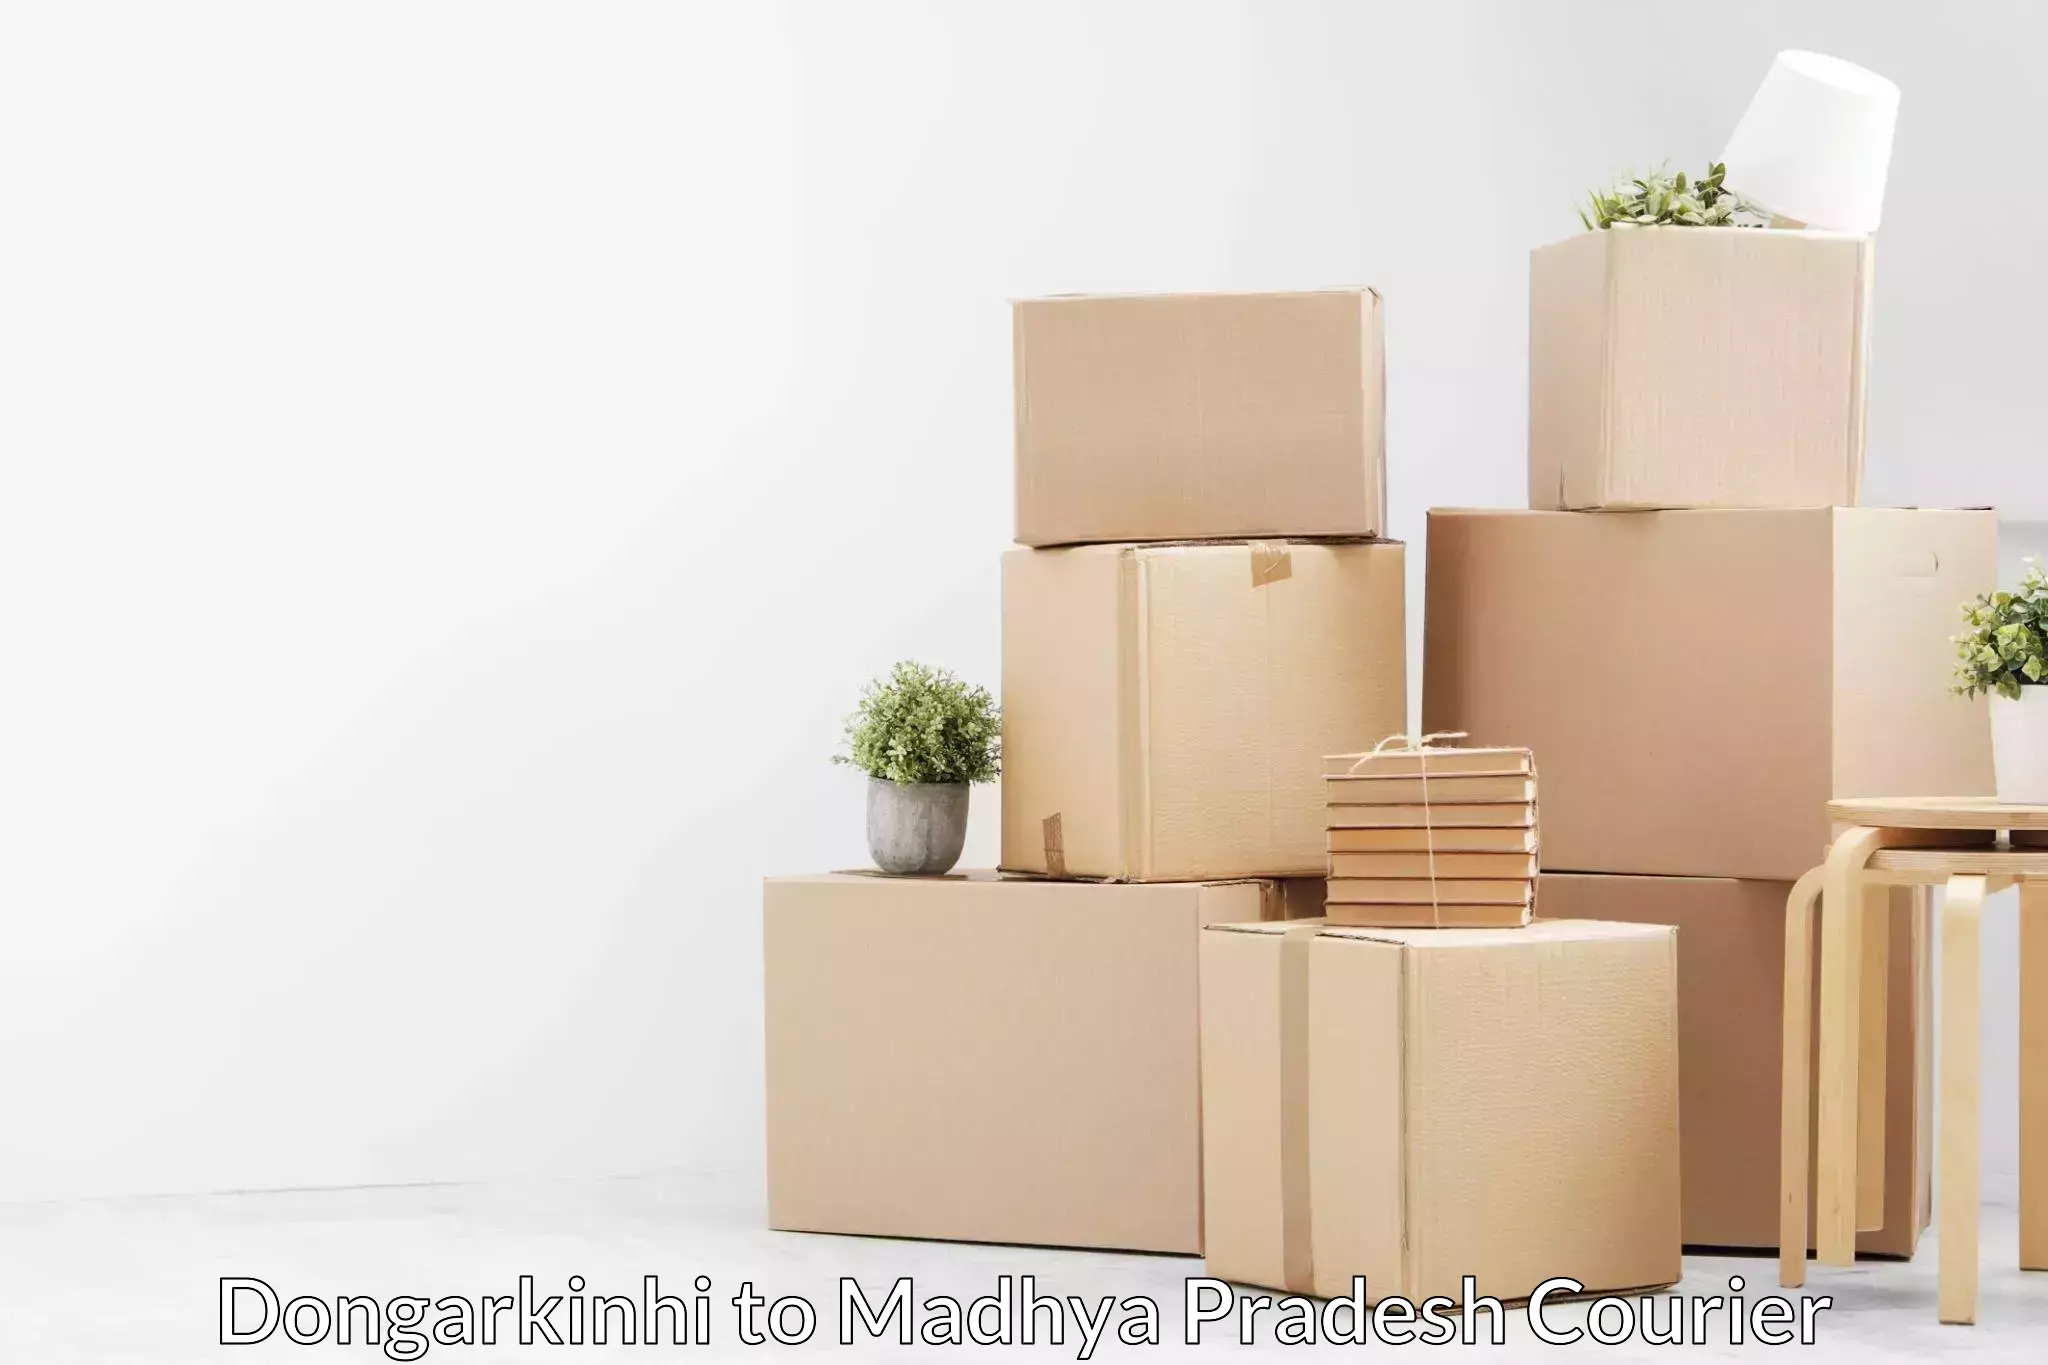 Furniture moving specialists Dongarkinhi to Hatta